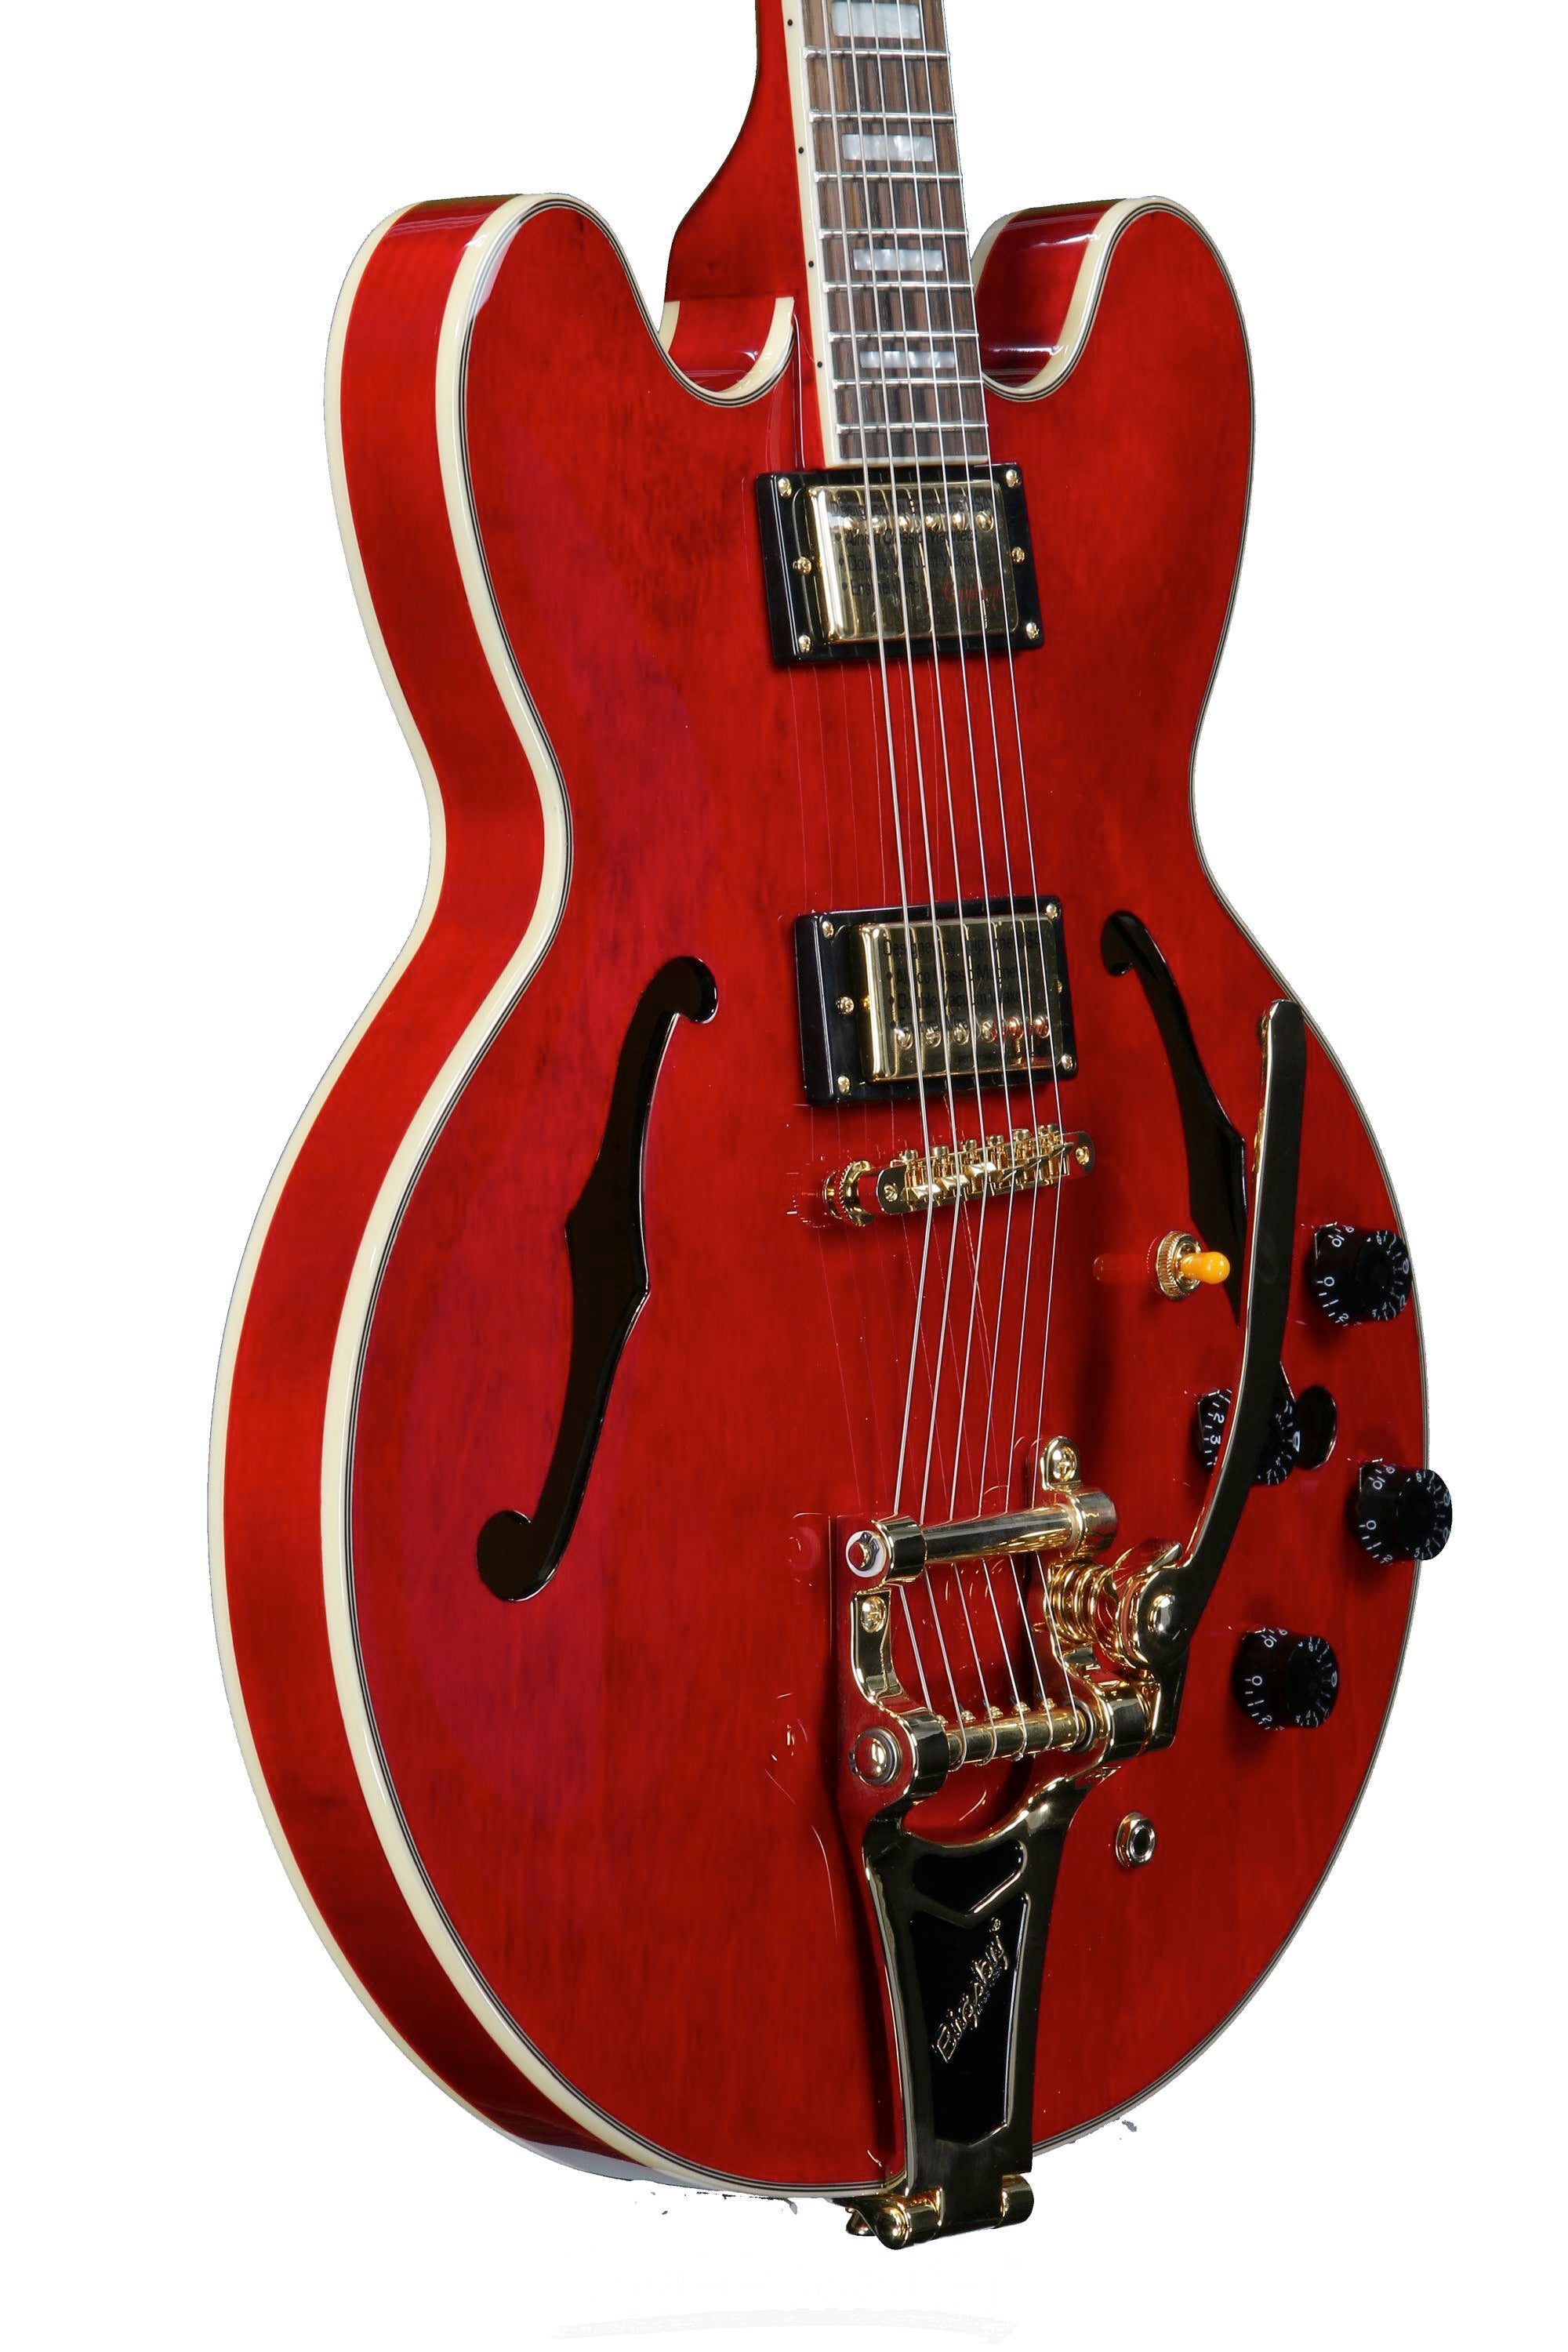 Epiphone Limited Edition ES-355 | Sweetwater